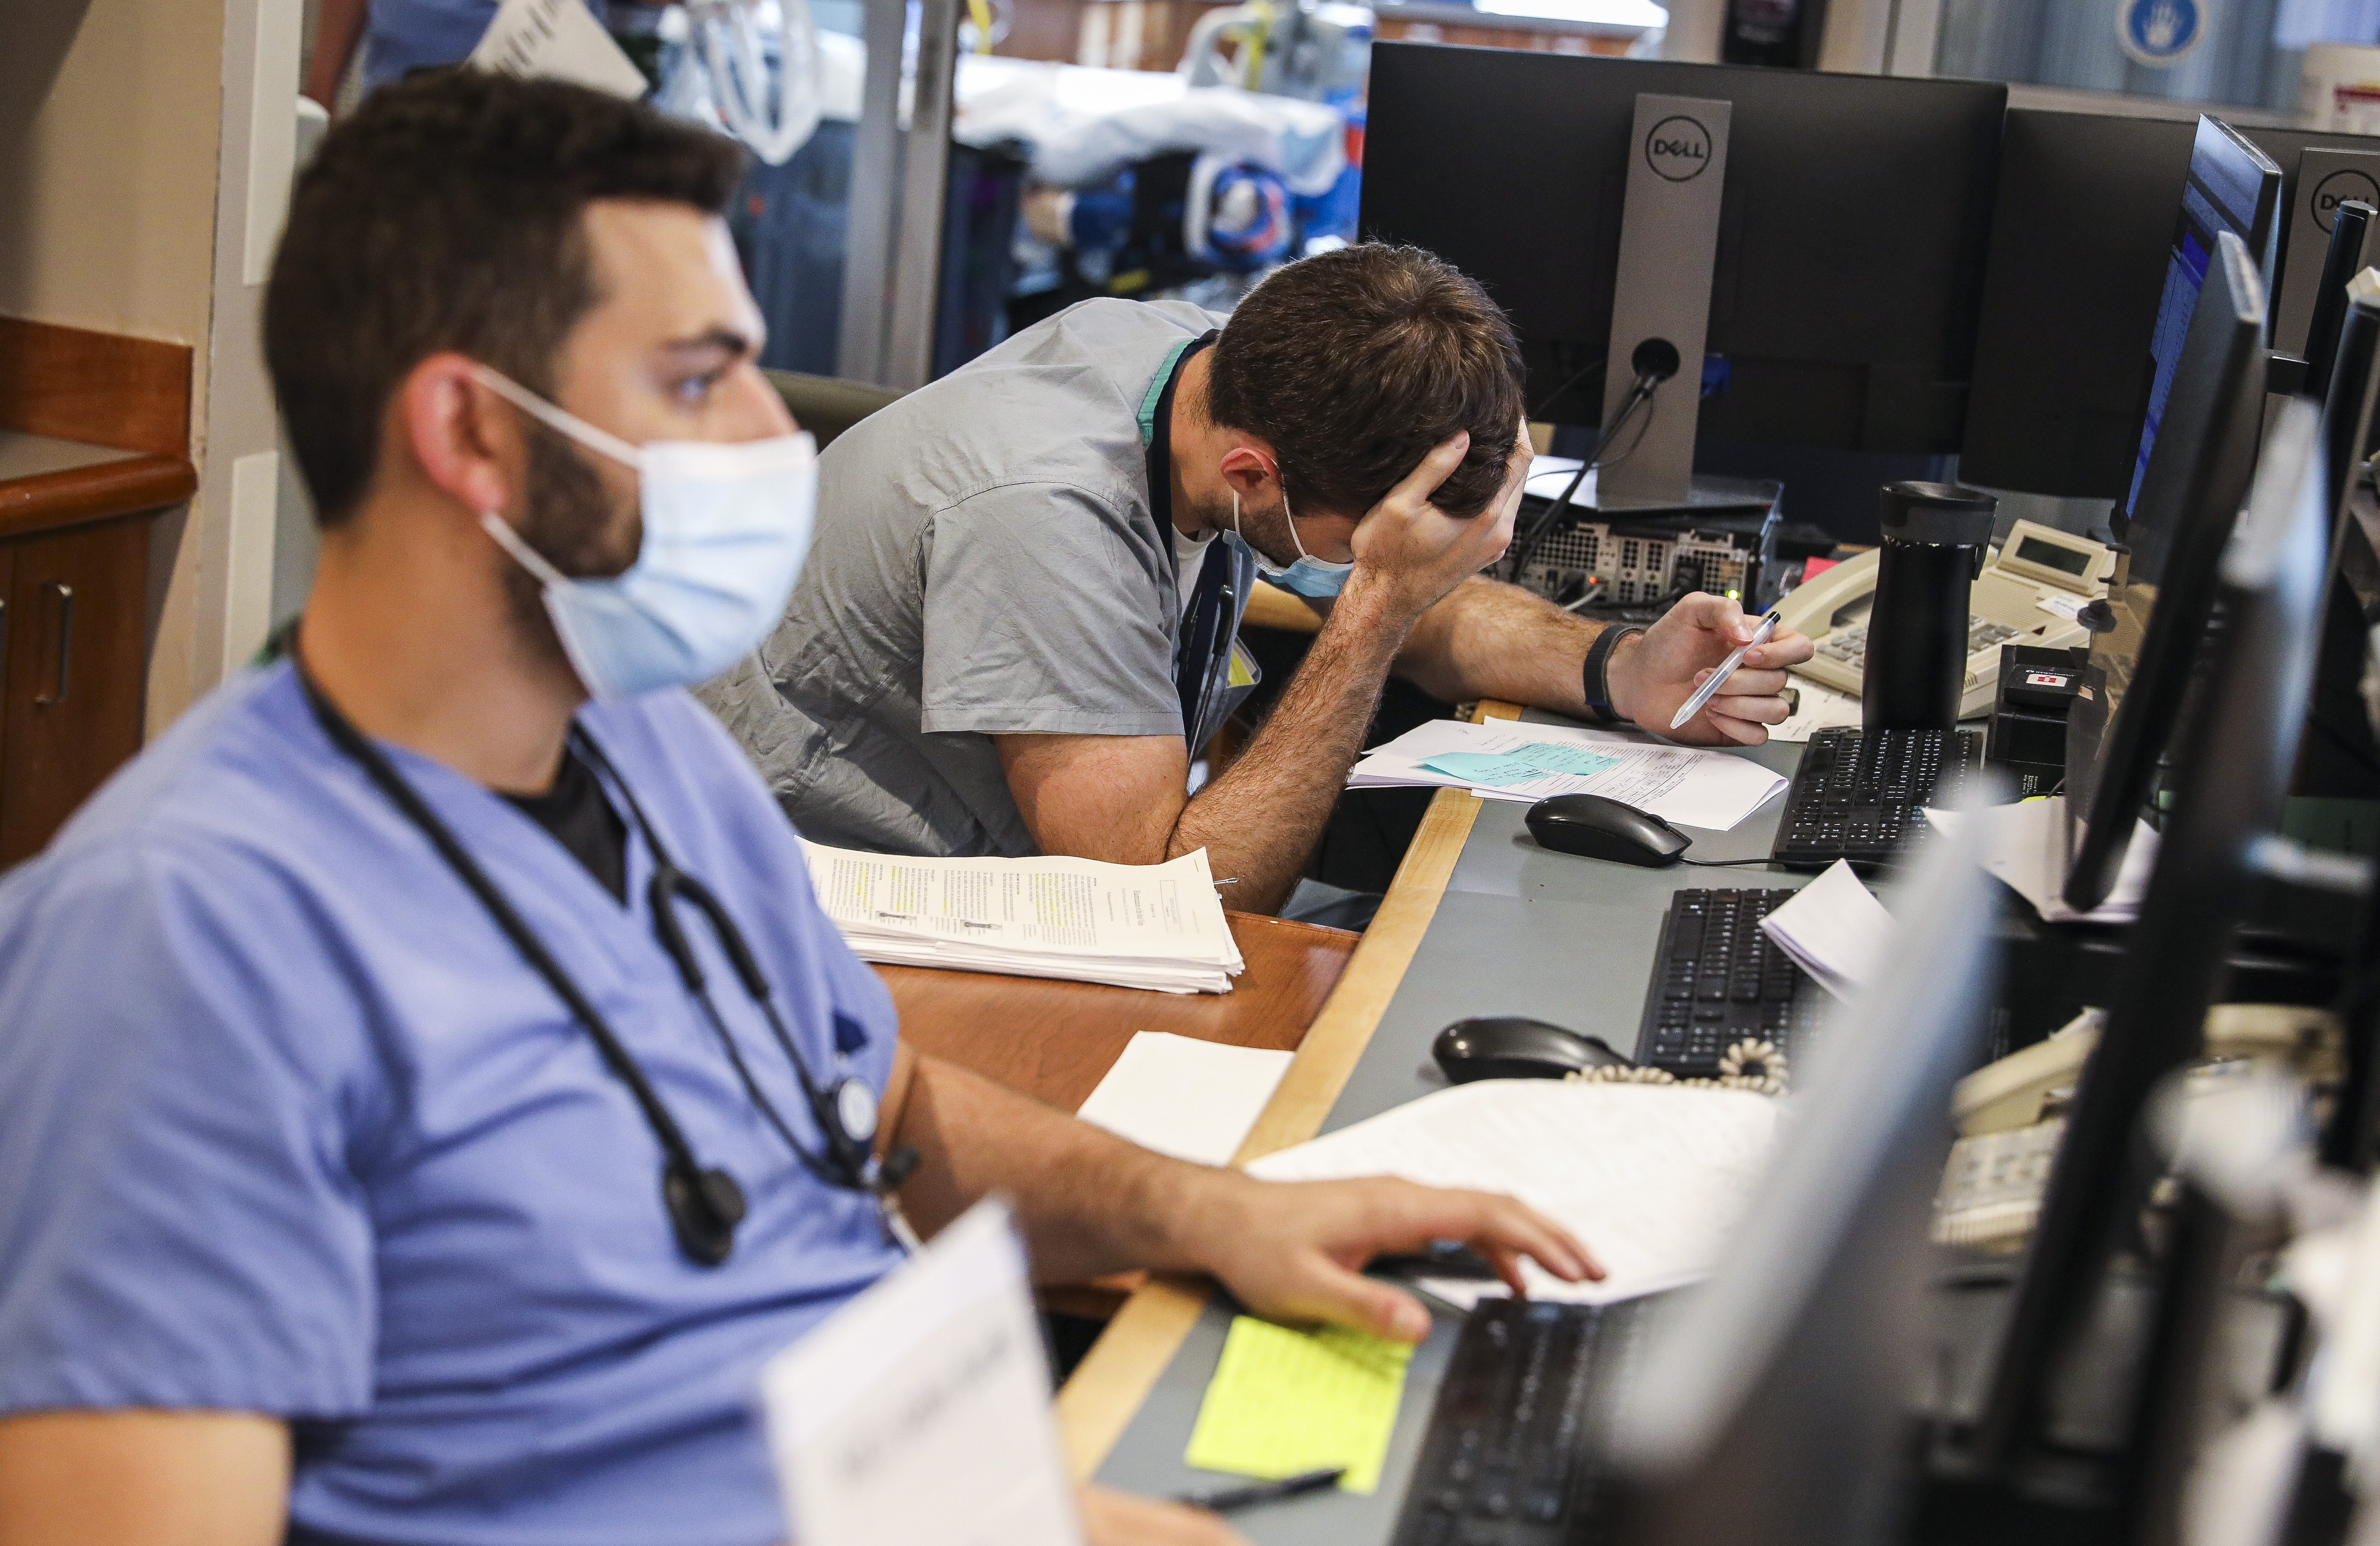 Doctors Basel Humos (left) and Benjamin Schwartz are working behind the desk in the medical intensive care unit at Tufts Medical Center on Thursday.